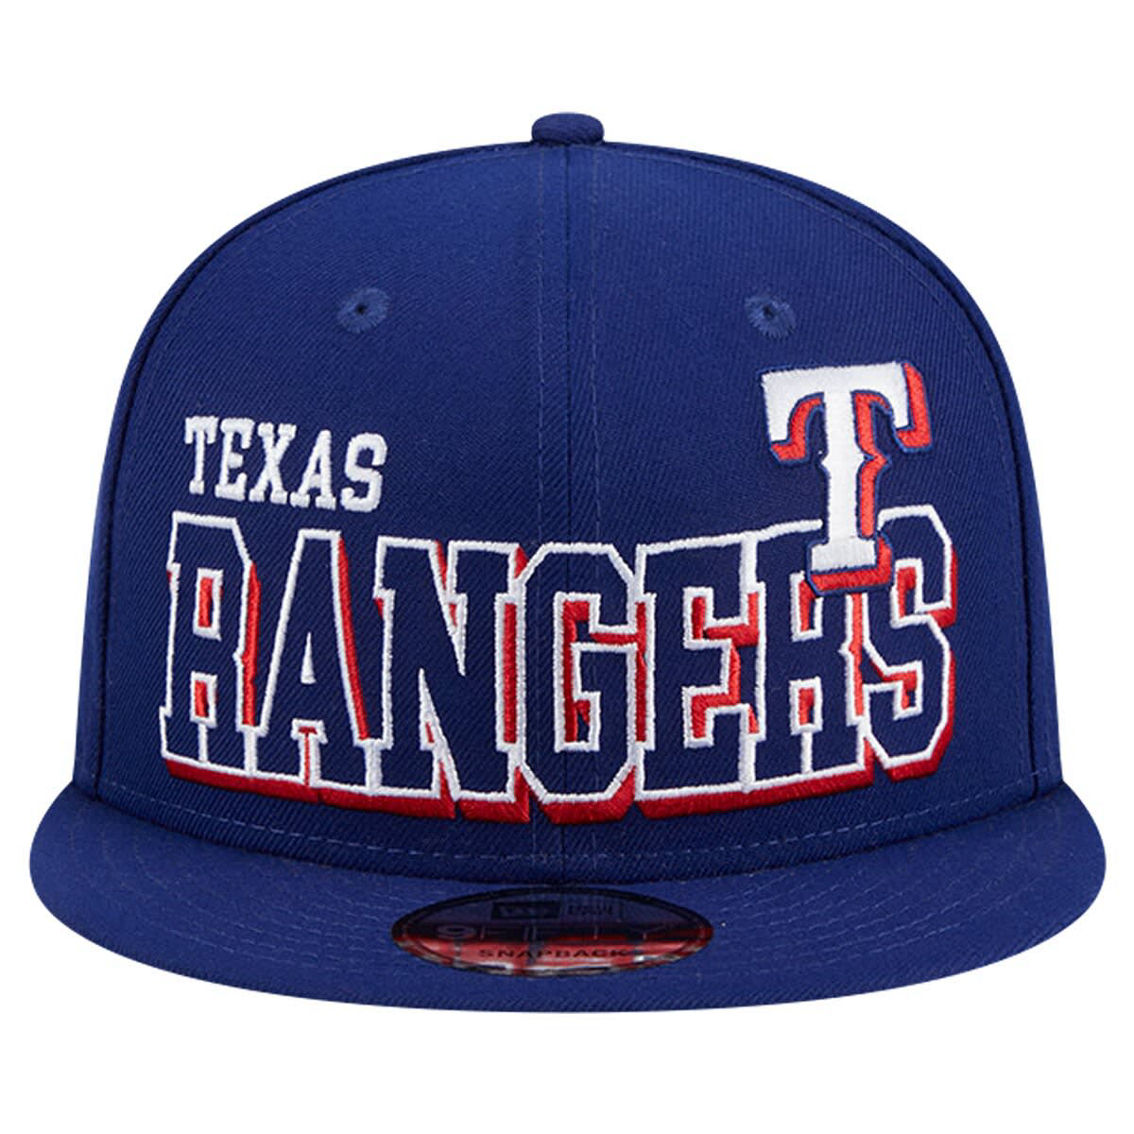 New Era Men's Royal Texas Rangers Game Day Bold 9FIFTY Snapback Hat - Image 3 of 4